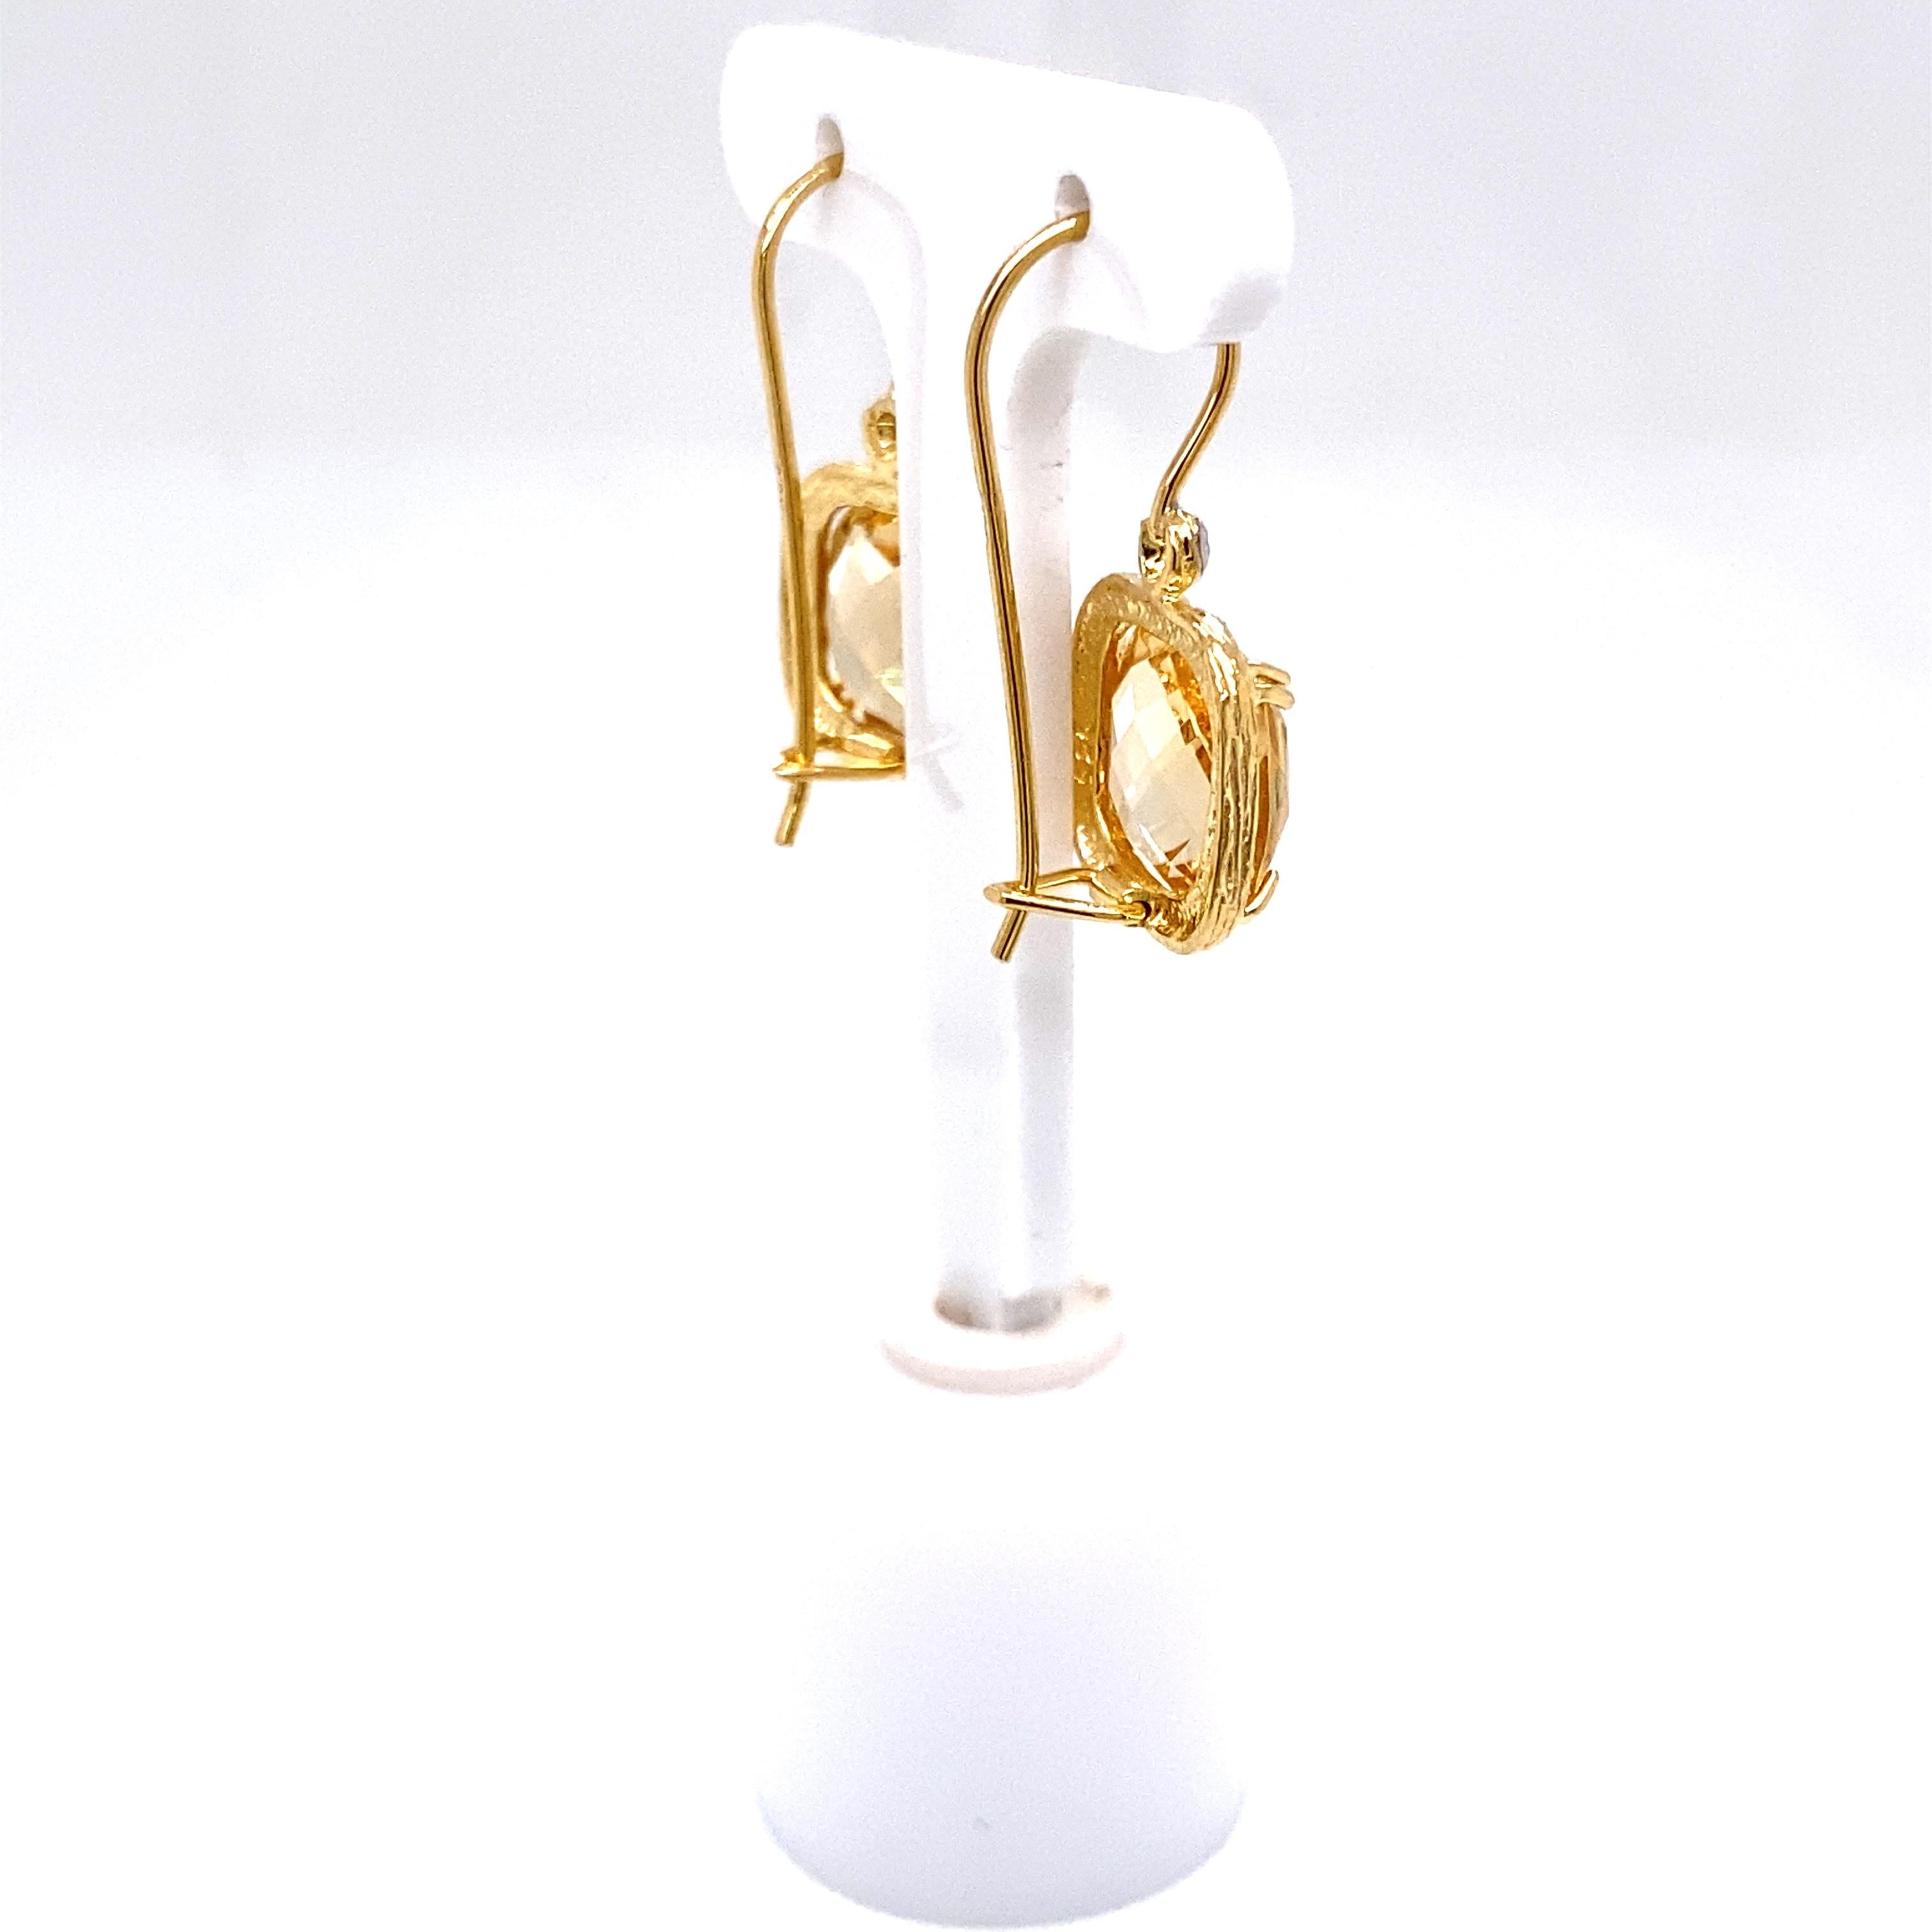 14 Karat Yellow Gold Hand-Crafted Polish-Finished Drop Earrings, Set with a 10mm Cushion-Cut Semi-Precious Citrine Color Stone, and Accented with 0.04 Carats of Bezel Set Diamonds.
